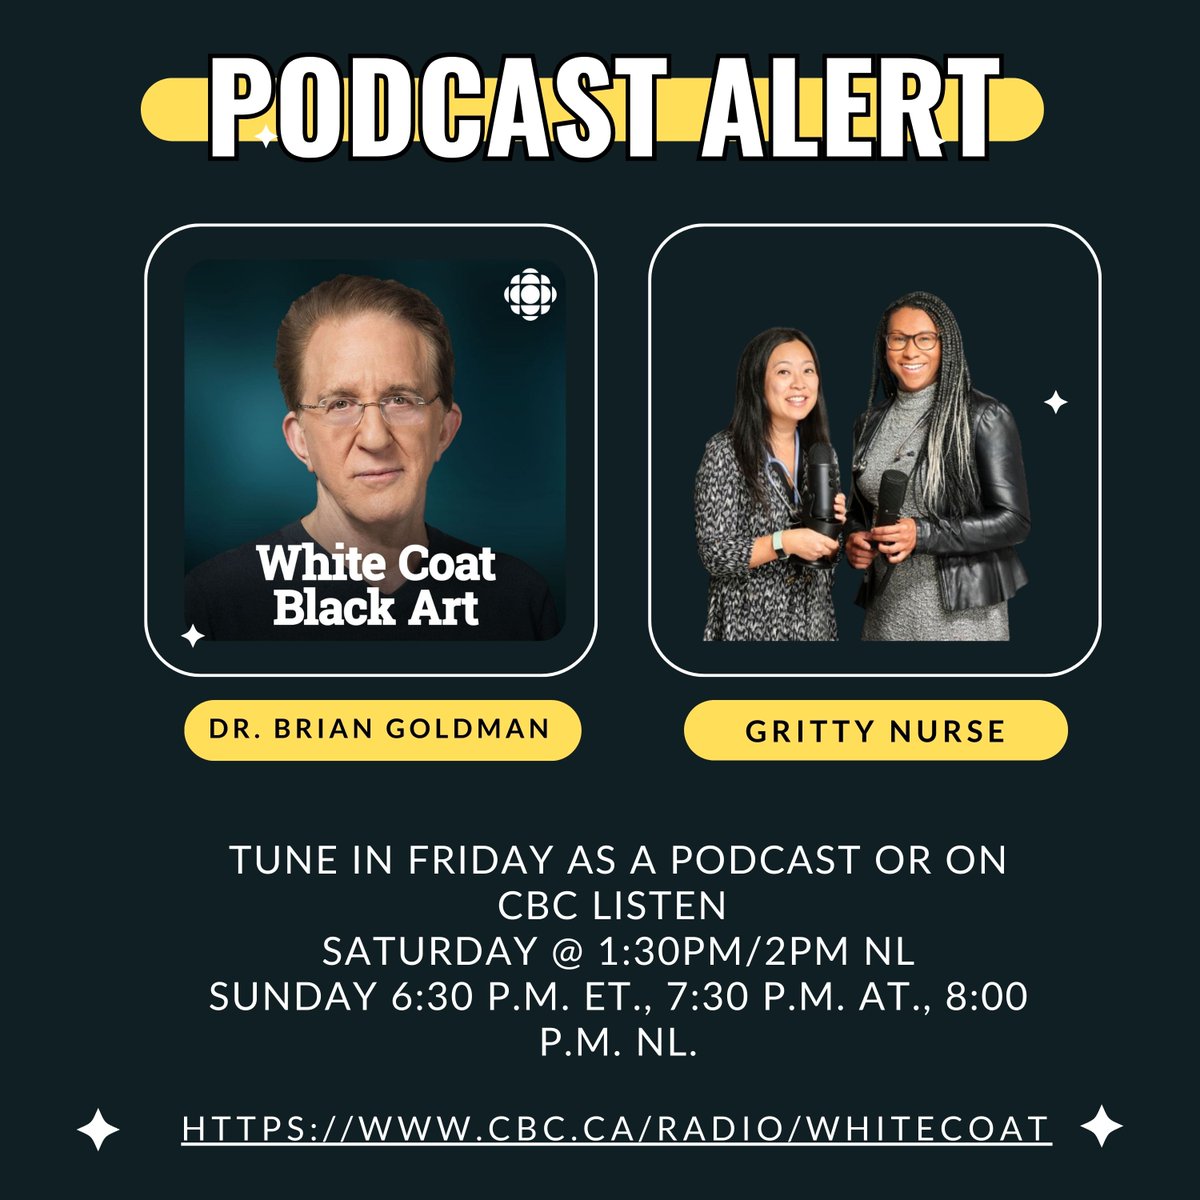 Get your ears ready for this DOPE interview with @NightShiftMD ! Thank you for having us @GrittyNurse to discuss our thoughts and opinions on #nursing, moving into journalism, speaking out as a nurse, as well as discuss our #1 National Best Selling Book, #TheWisdomOfNurses!